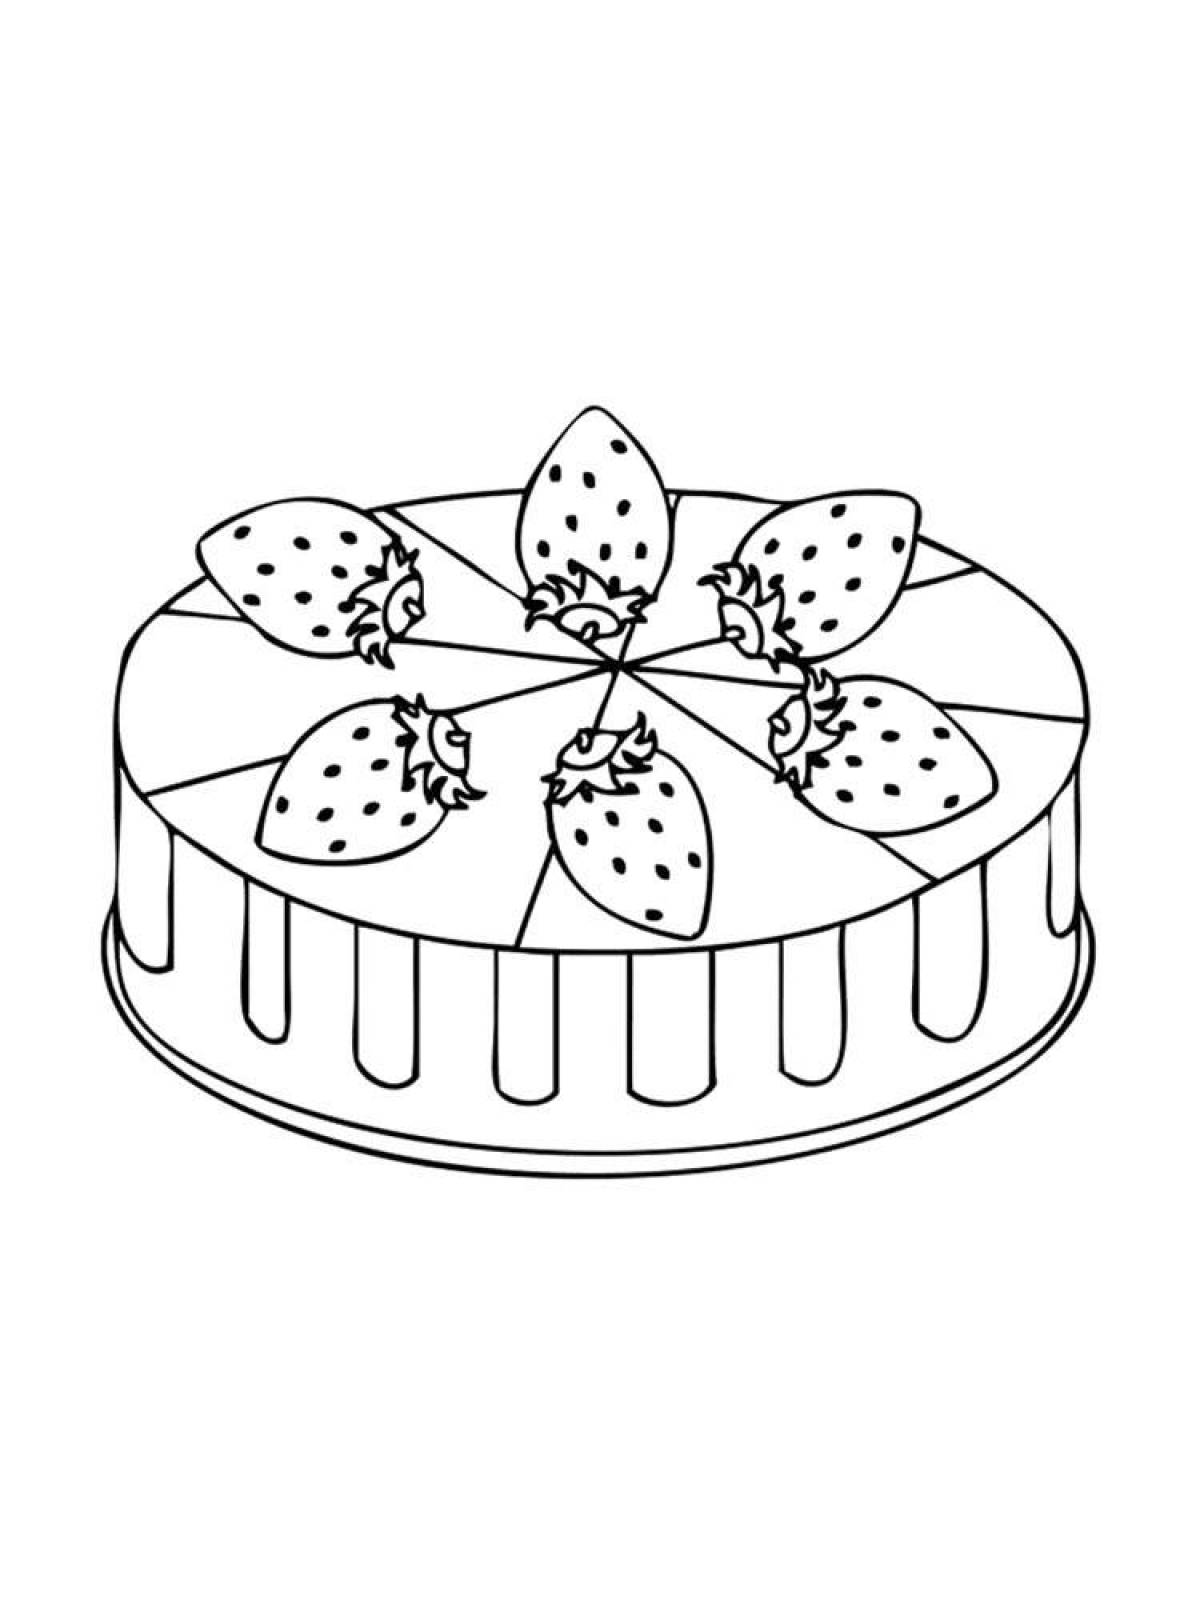 Tempting pie coloring page